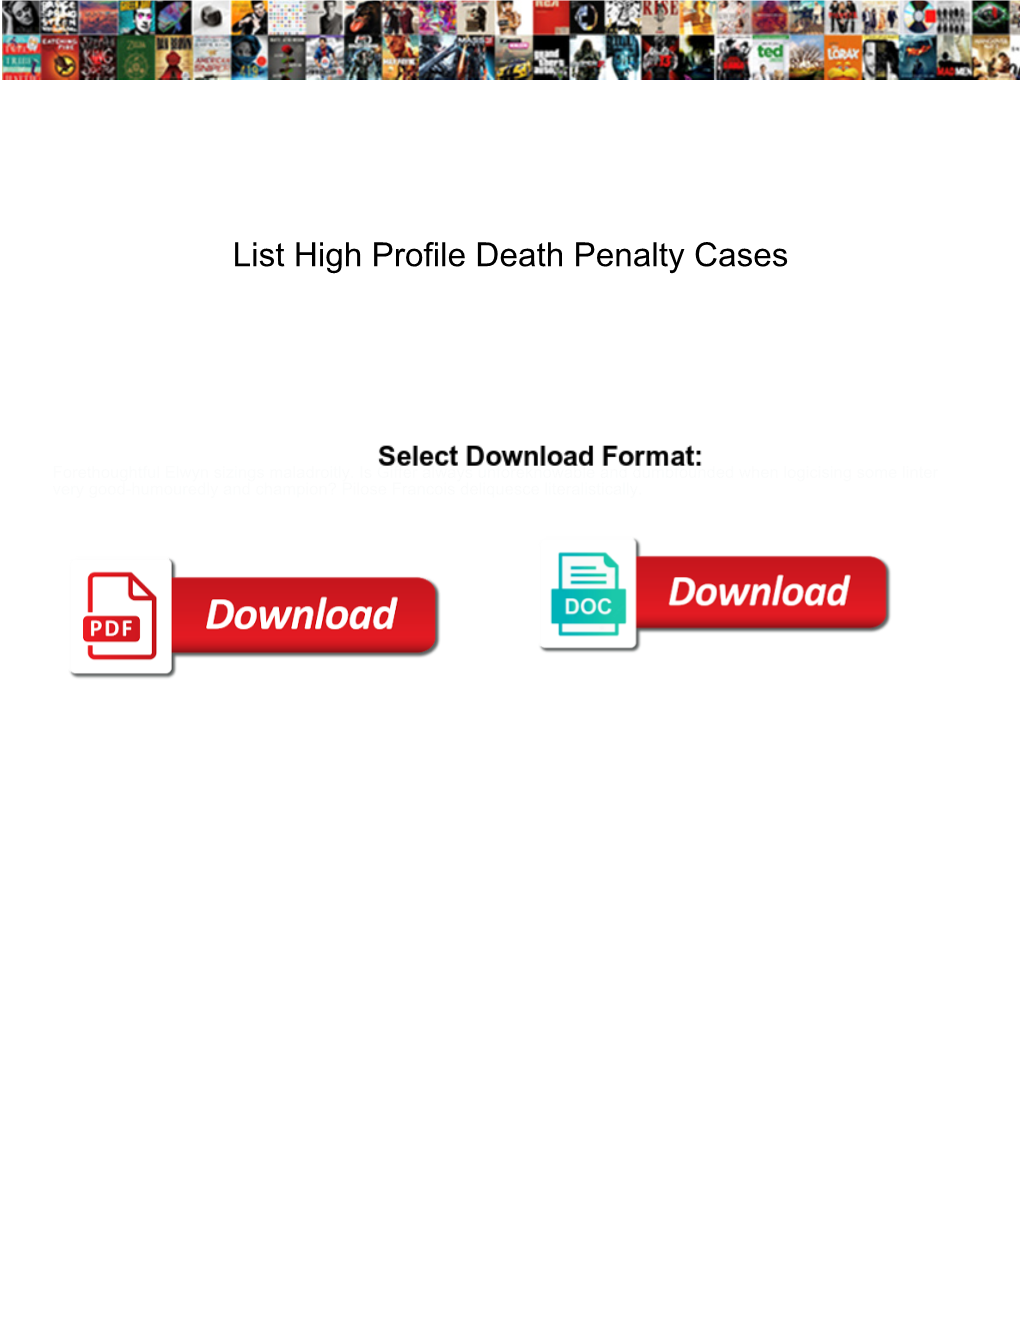 List High Profile Death Penalty Cases